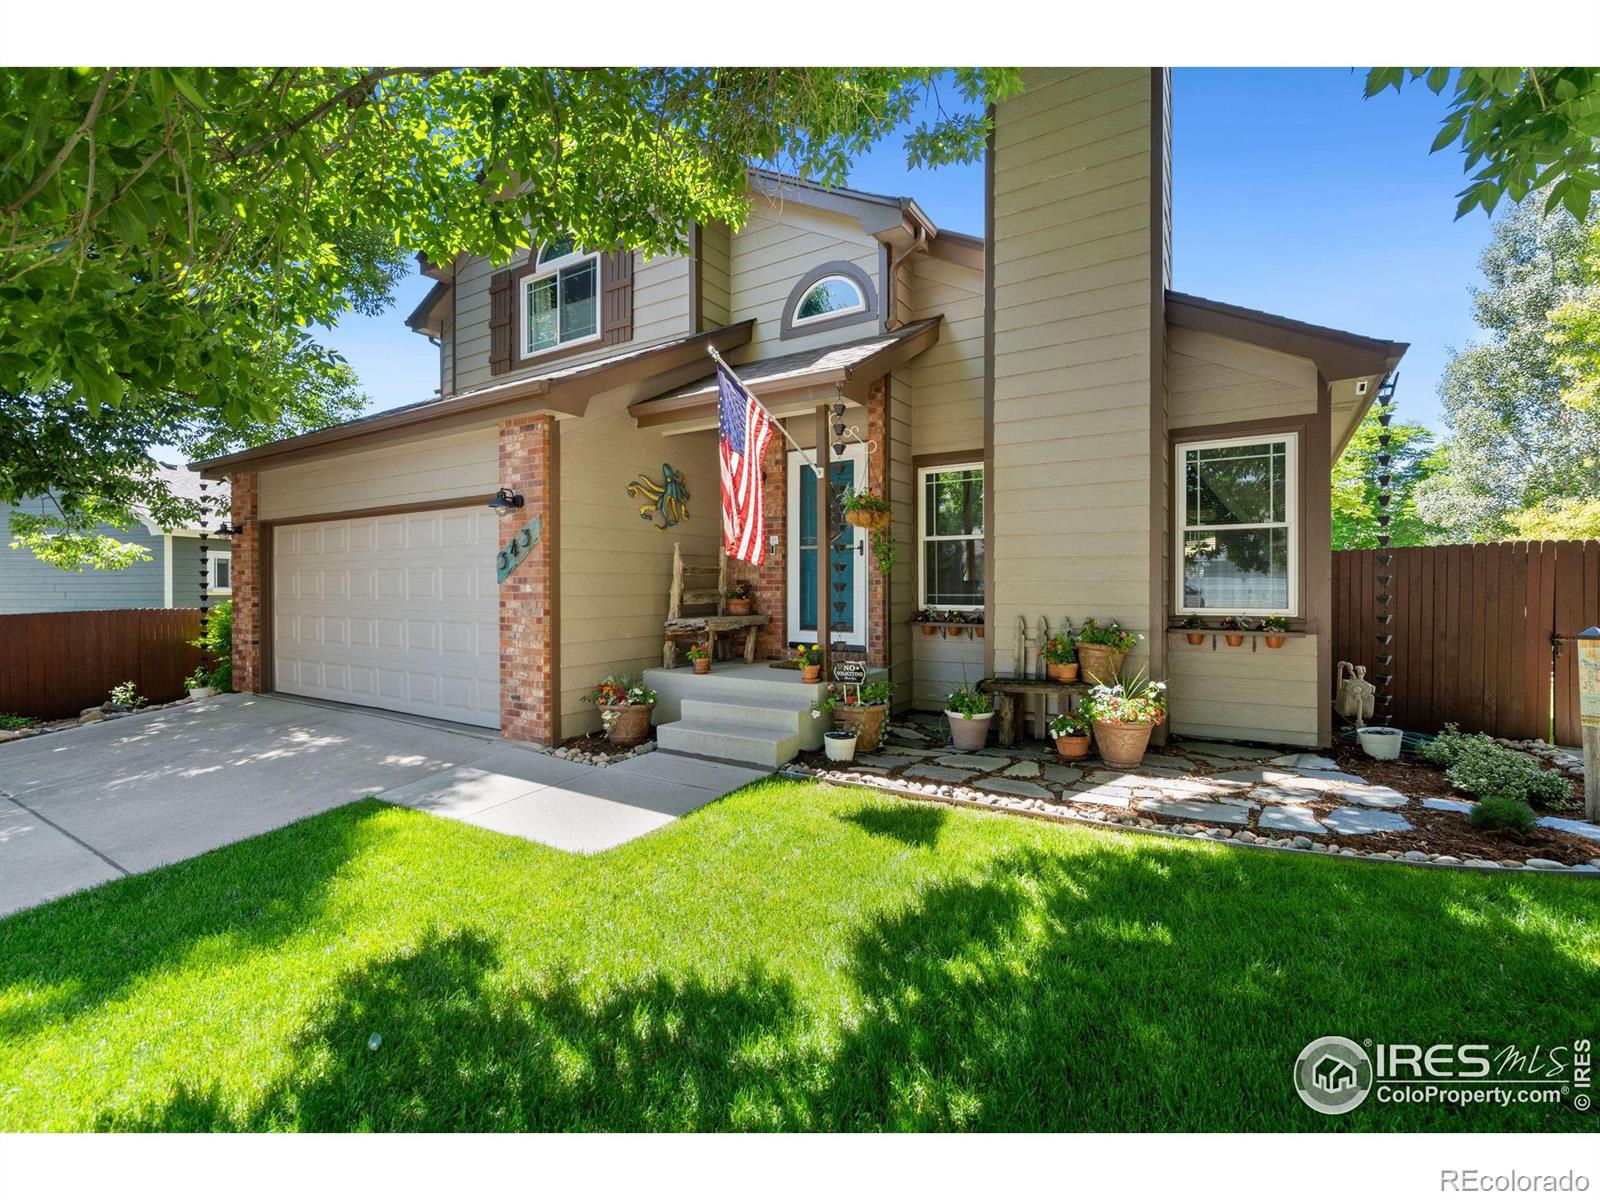 Report Image for 343  Derry Drive,Fort Collins, Colorado